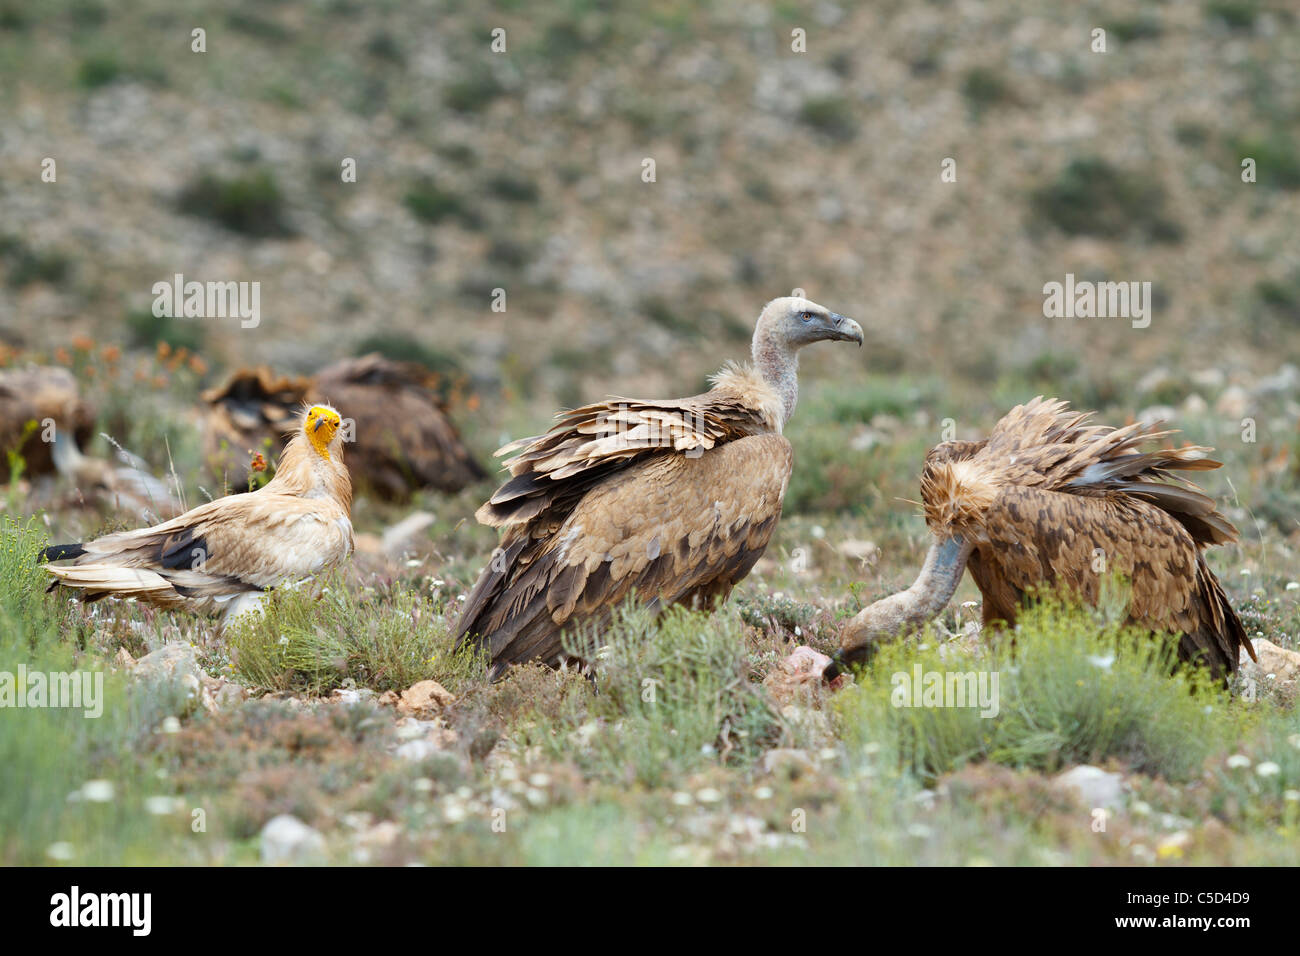 egyptian vulture (neophron percnopterus) and griffon vulture (gyps fulvus), Aragon, Spain Stock Photo